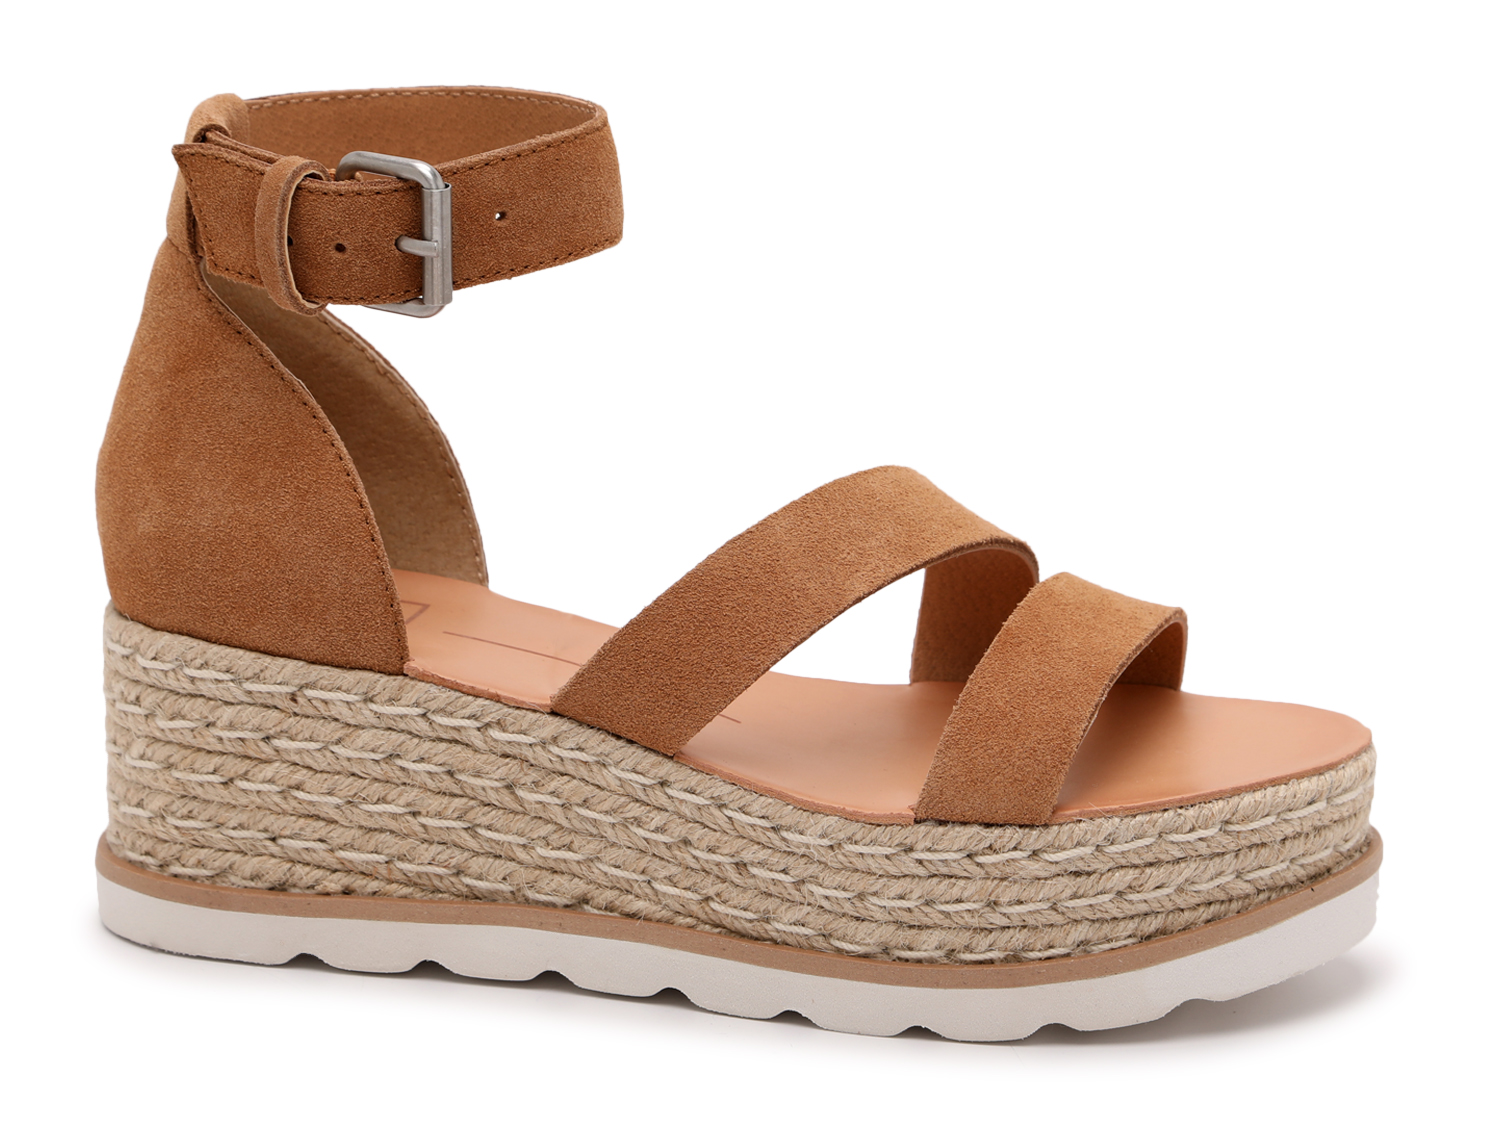 New 9.5 Details about   Dolce Vita Urban Wedge Sandal